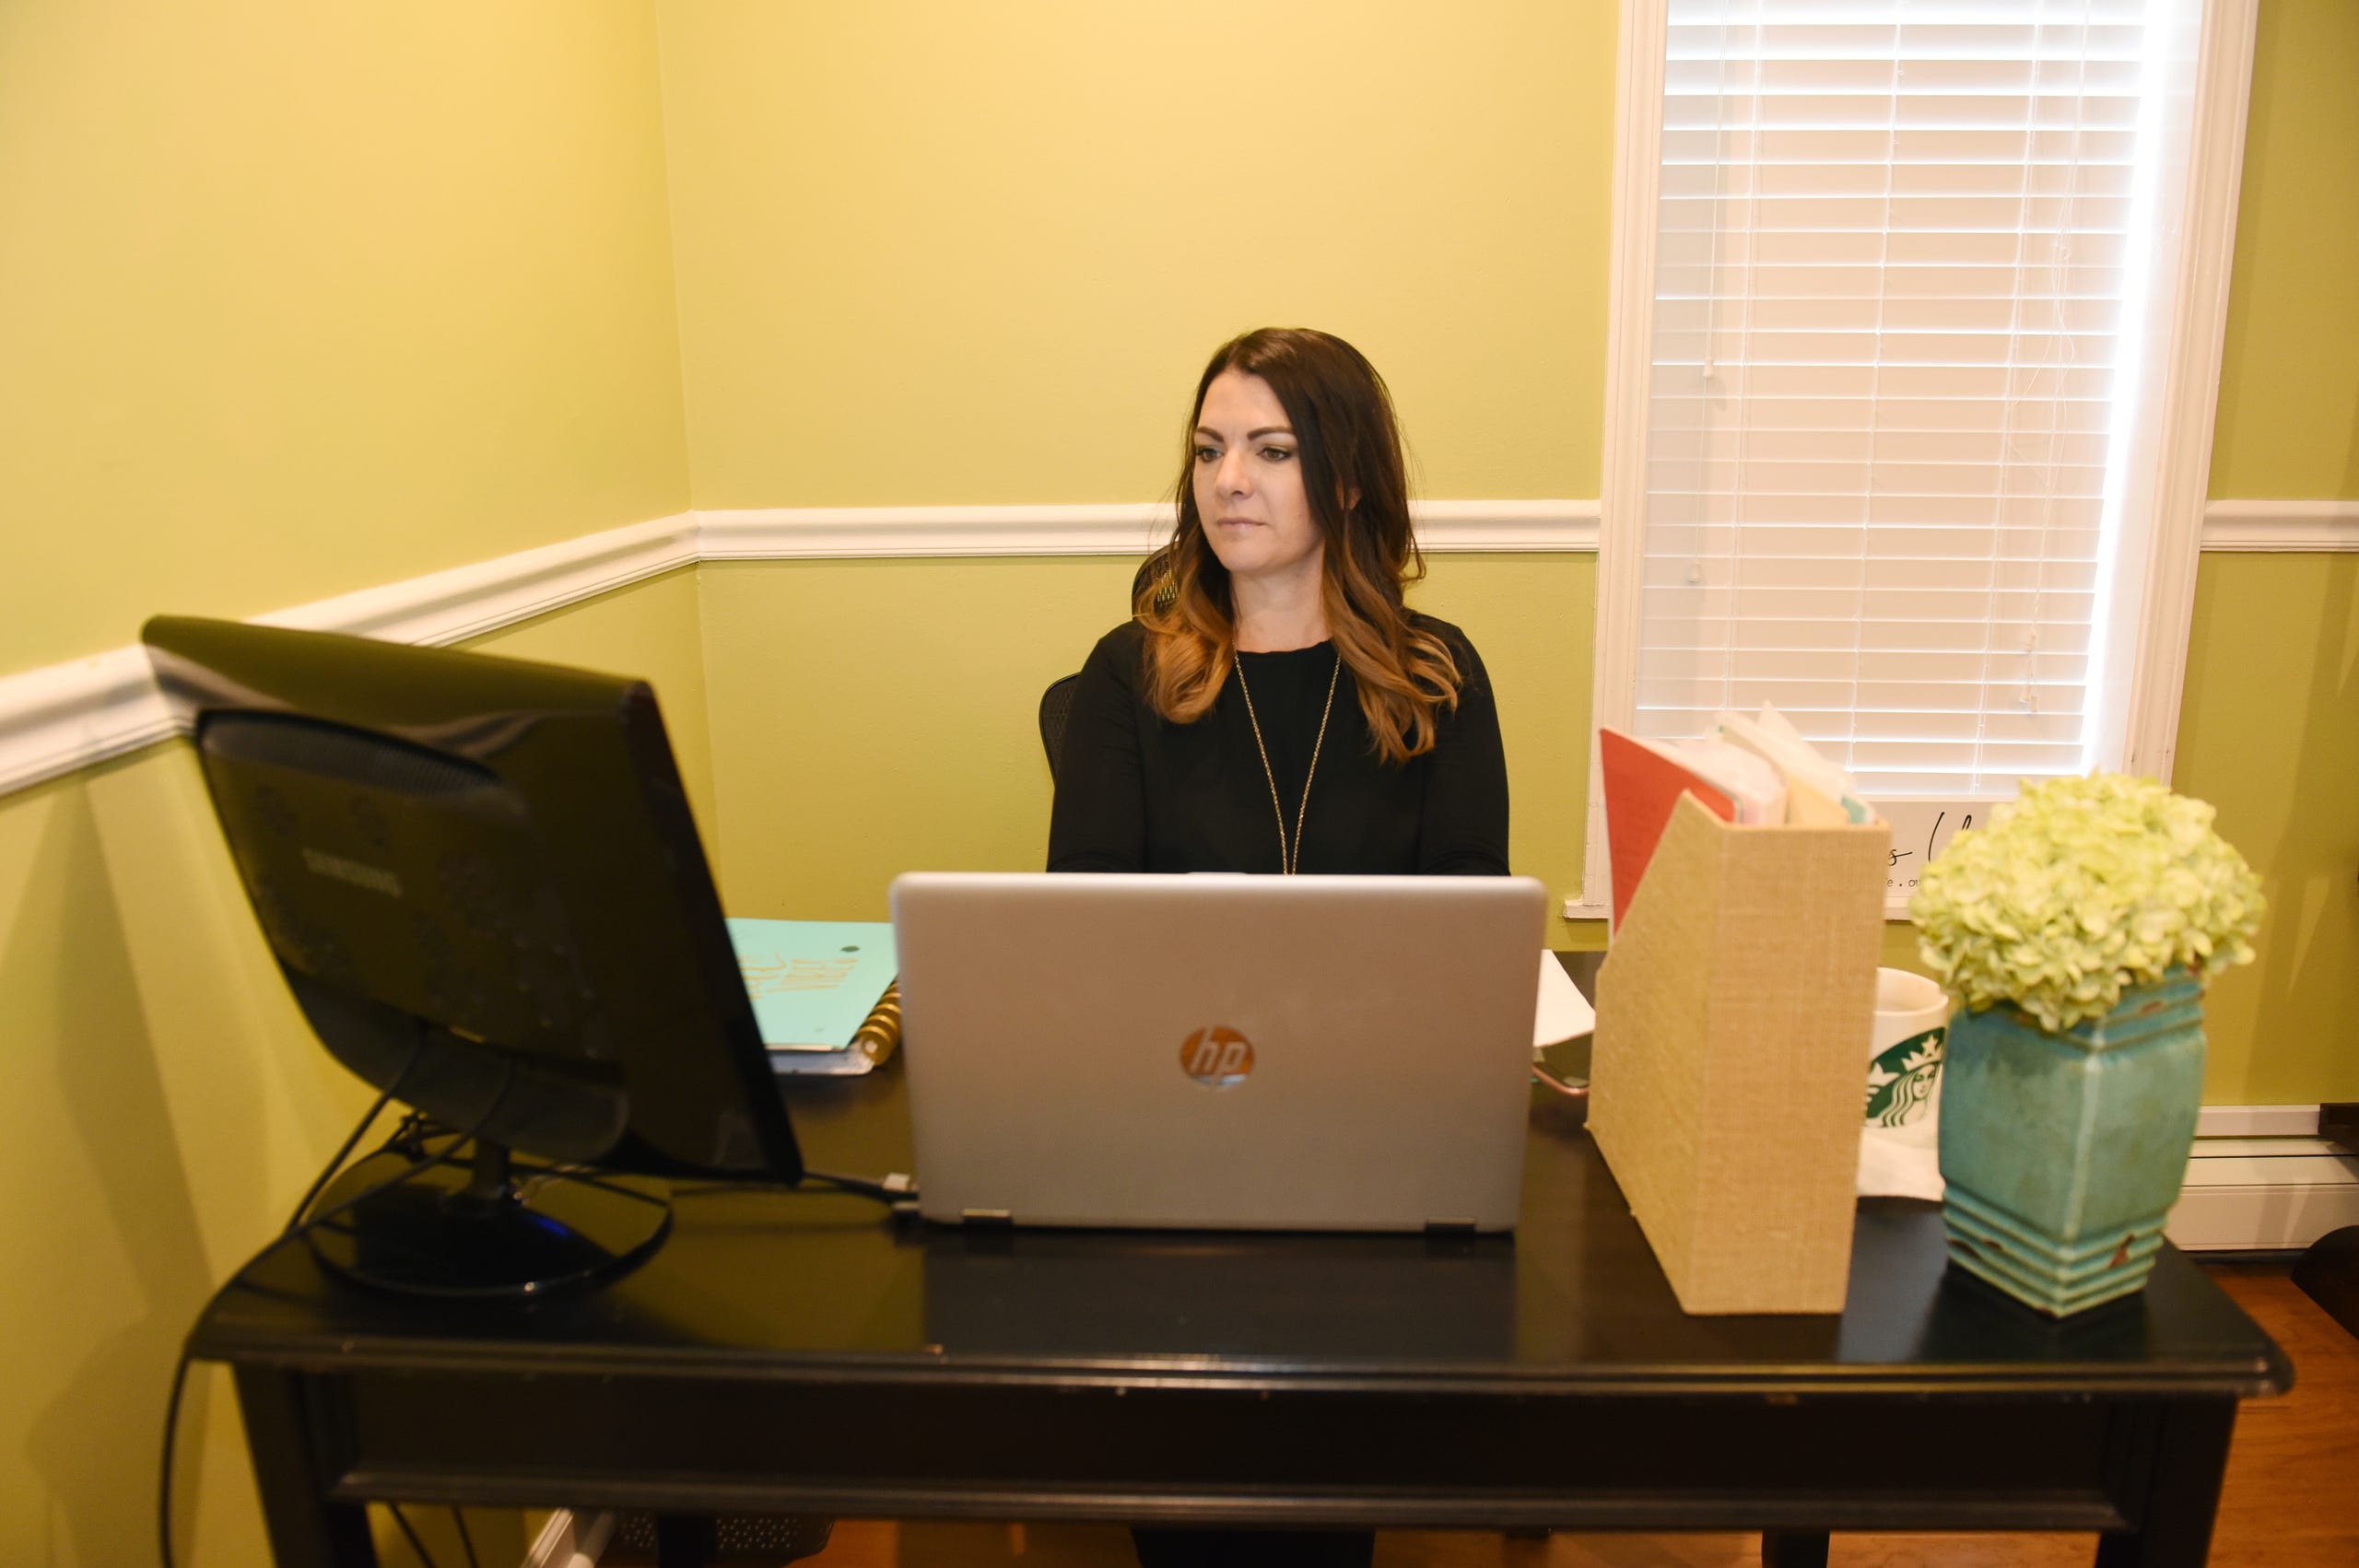 Malinda Mitchell has plenty of room in the office of her new Walled Lake home. Metro Detroit homebuyers are looking for more space as they continue working from home.